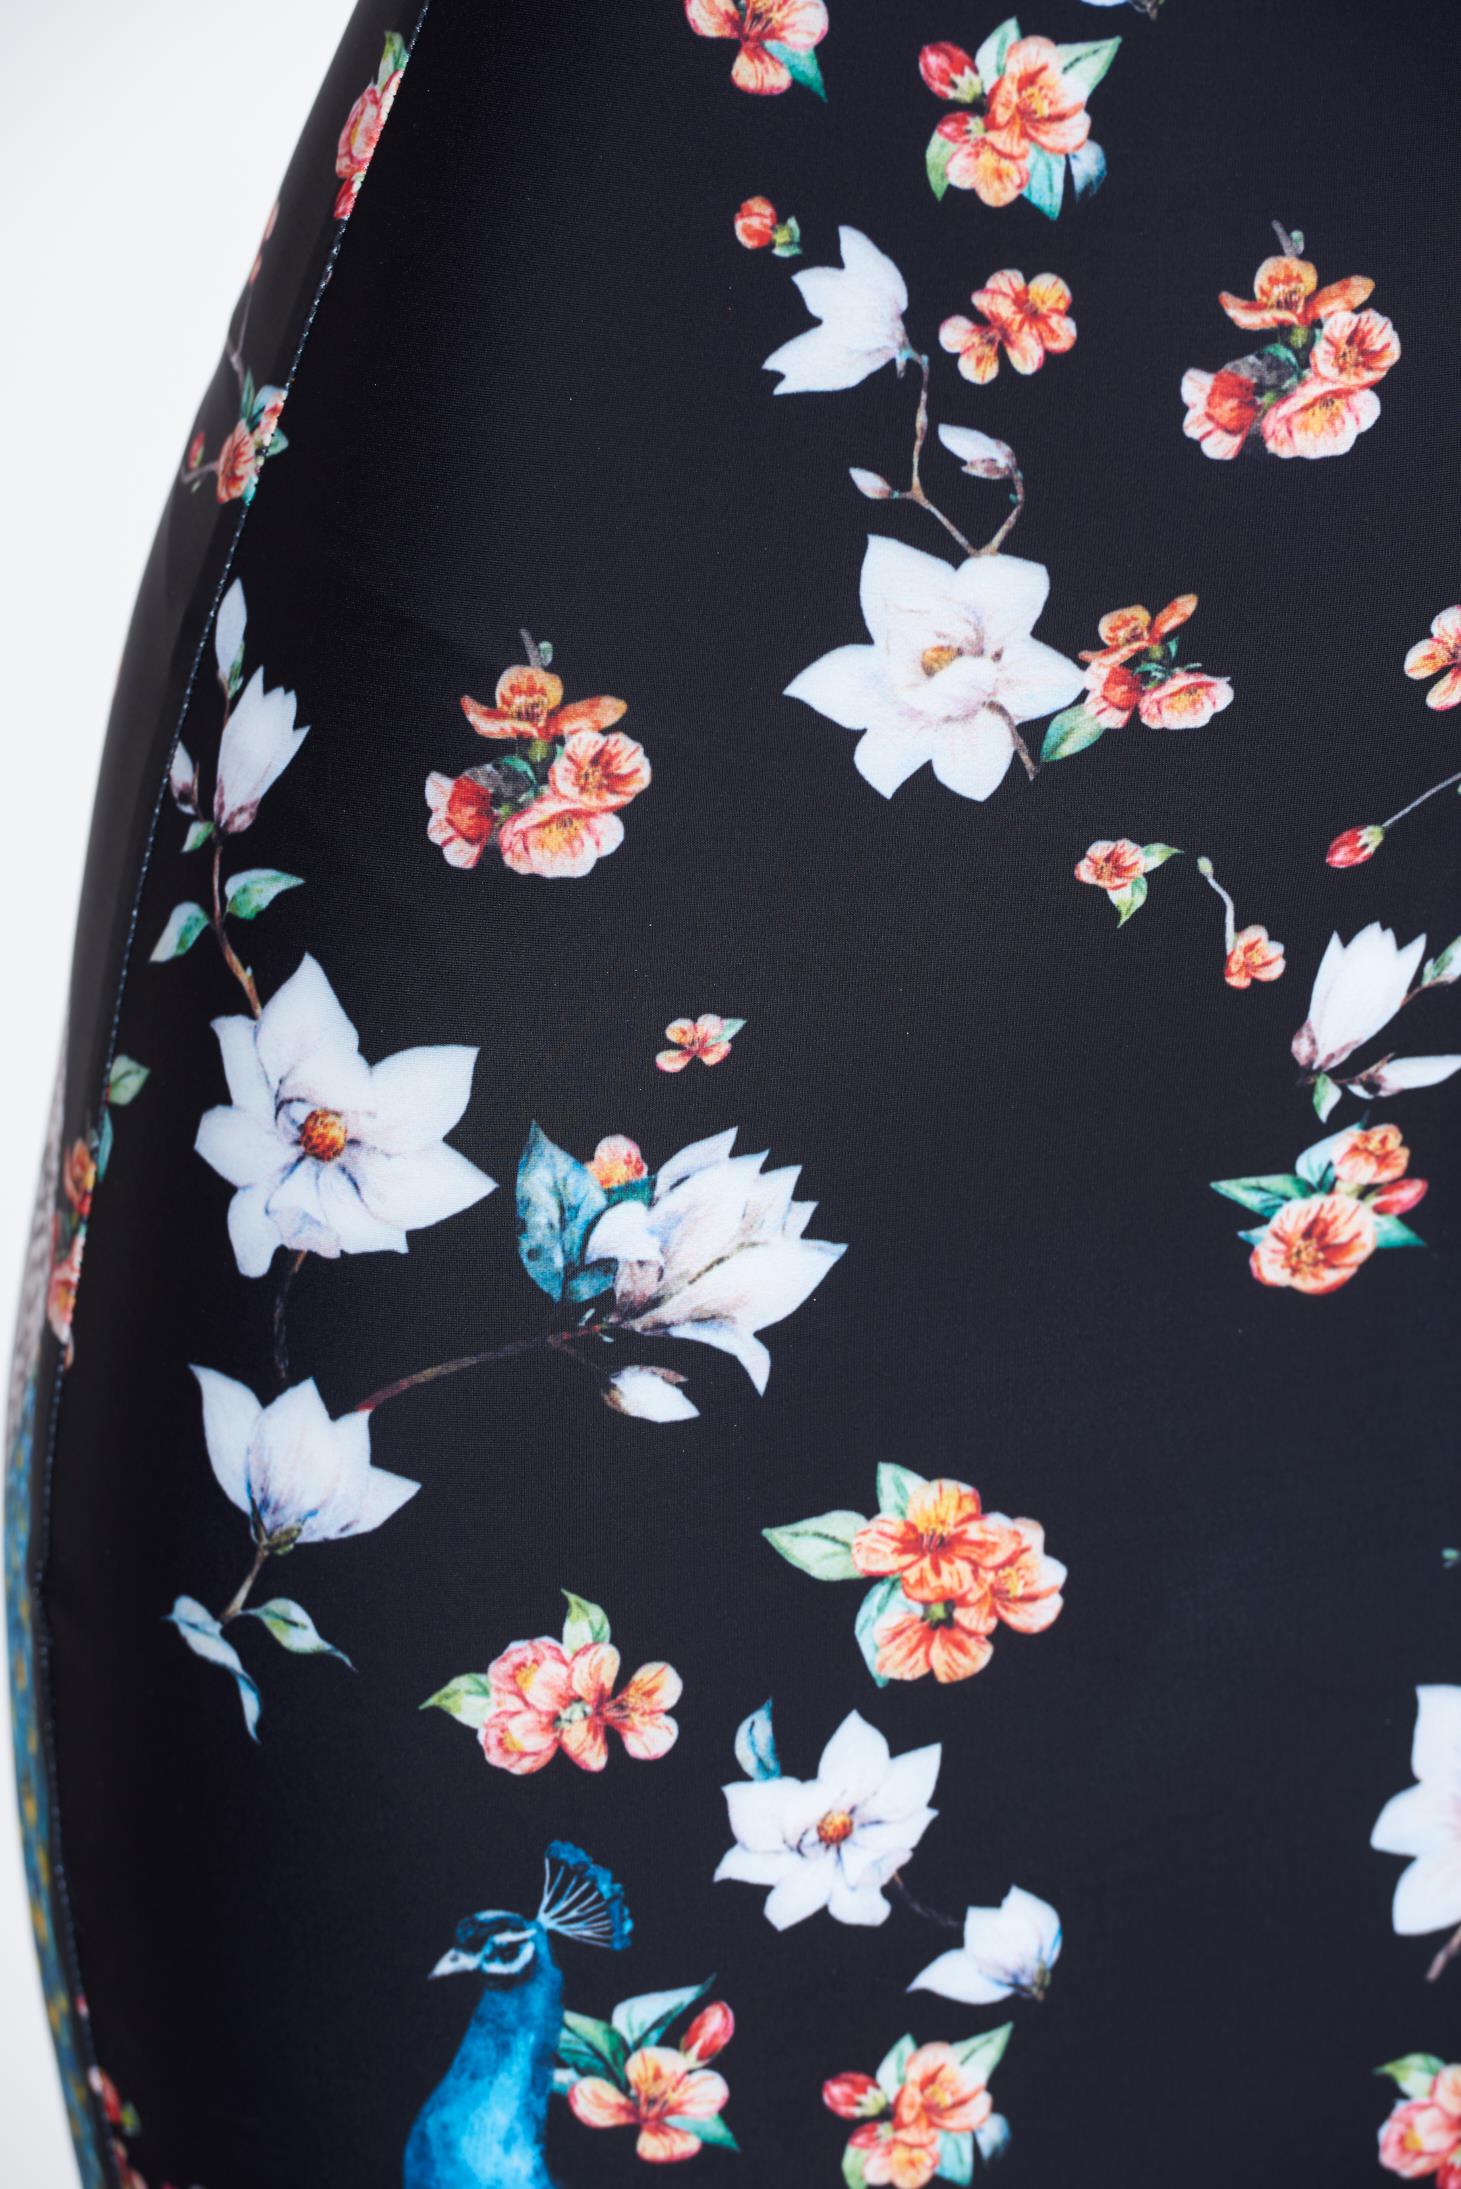 Black daily pencil dress with floral print